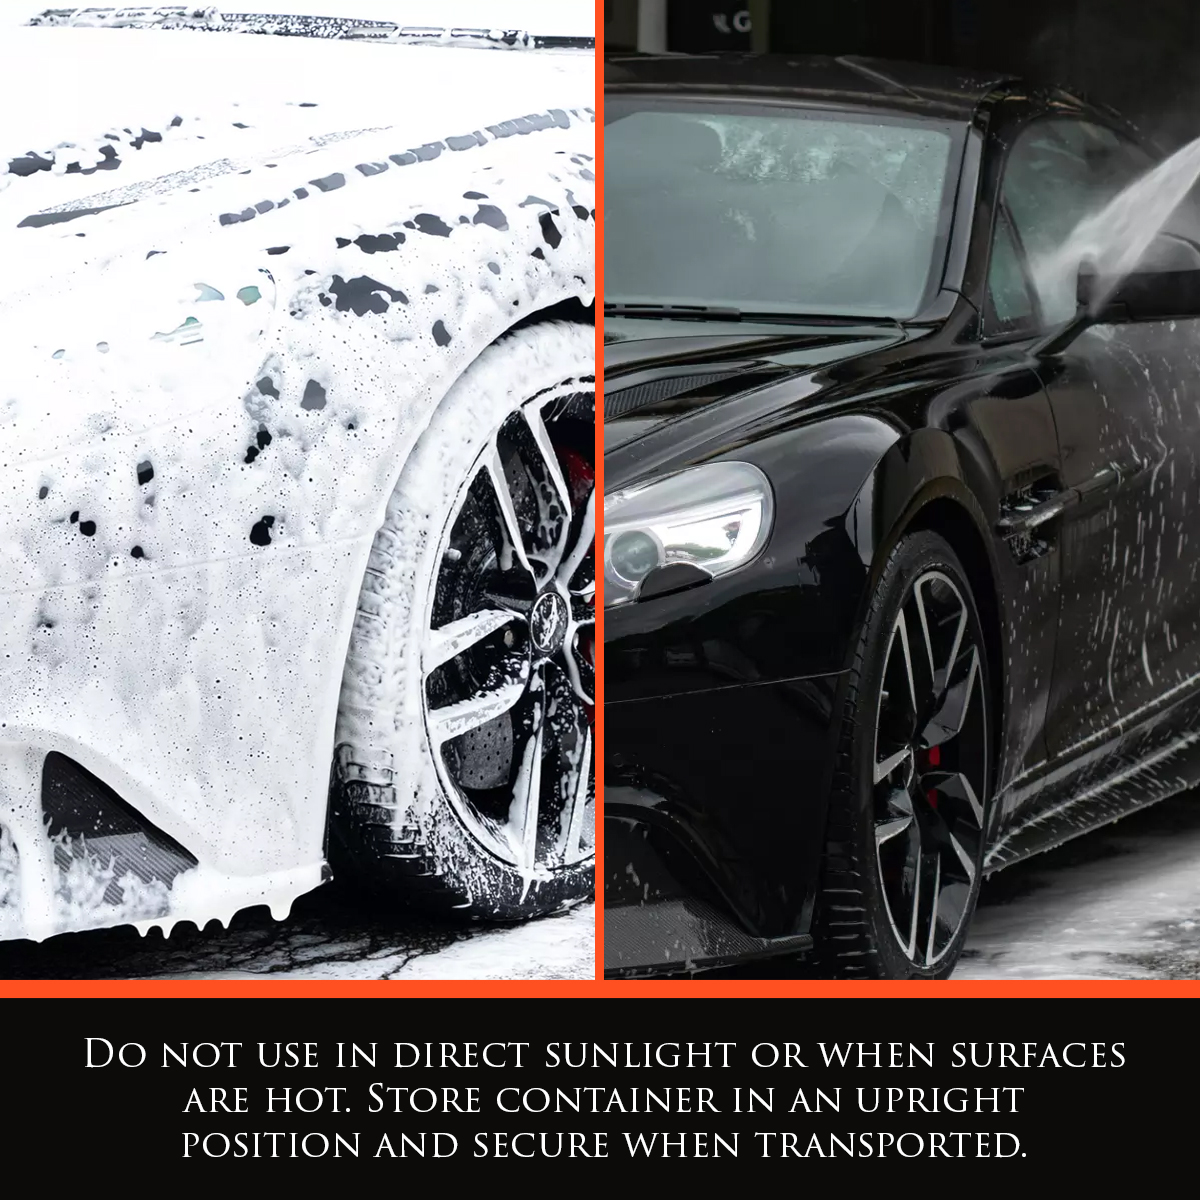 Left image shows a car covered in thick snow foam suds. Right image shows Arctic Storm Snow Foam being rinsed from a car with a pressure washer. Text: Do not use in direct sunlight or when surfaces are hot. Store container in an upright position and secure when transported.